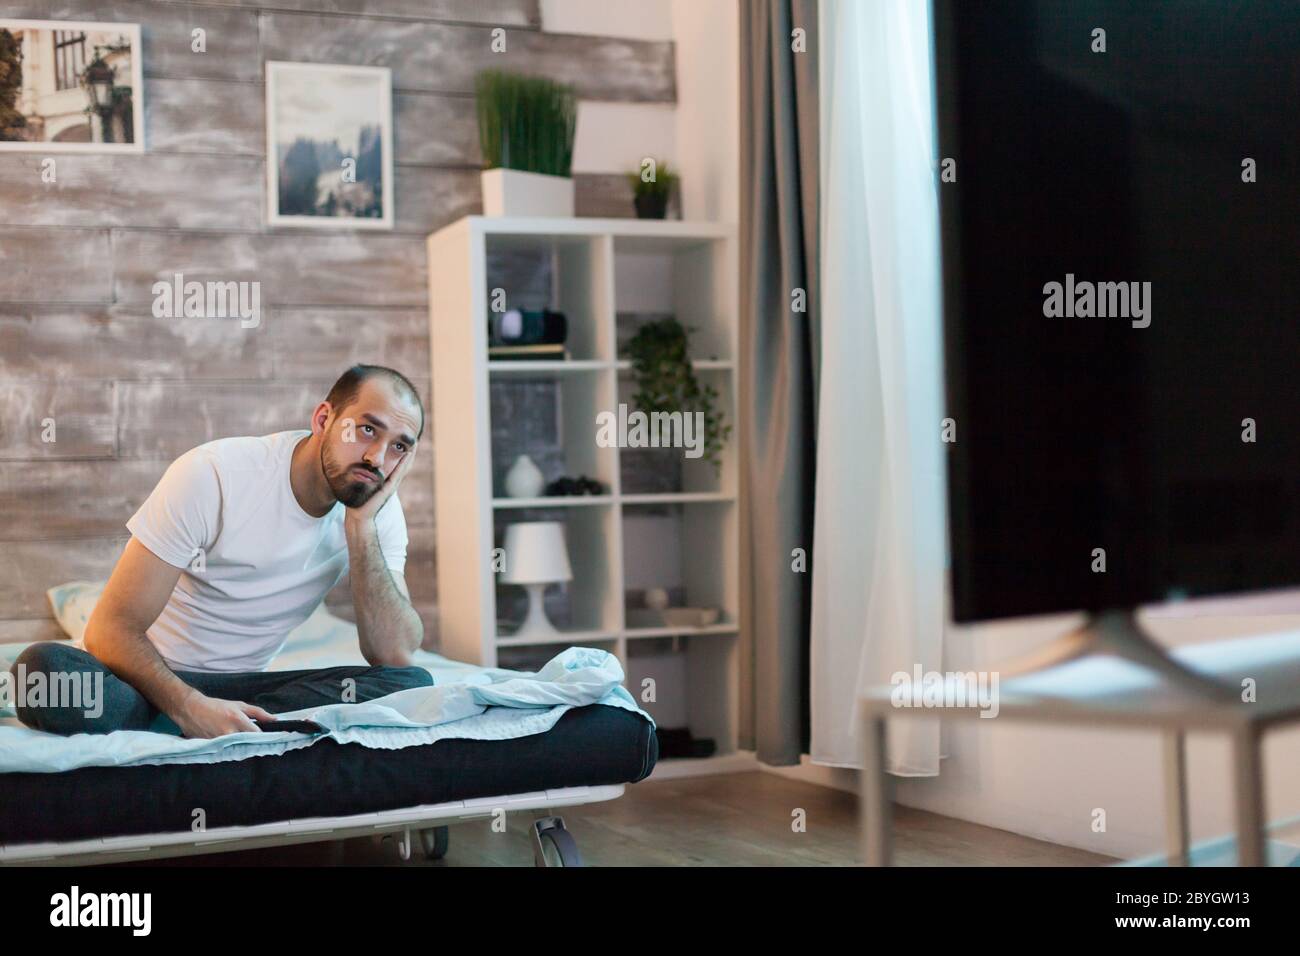 Bored man changing channels on tv late at night. Stock Photo